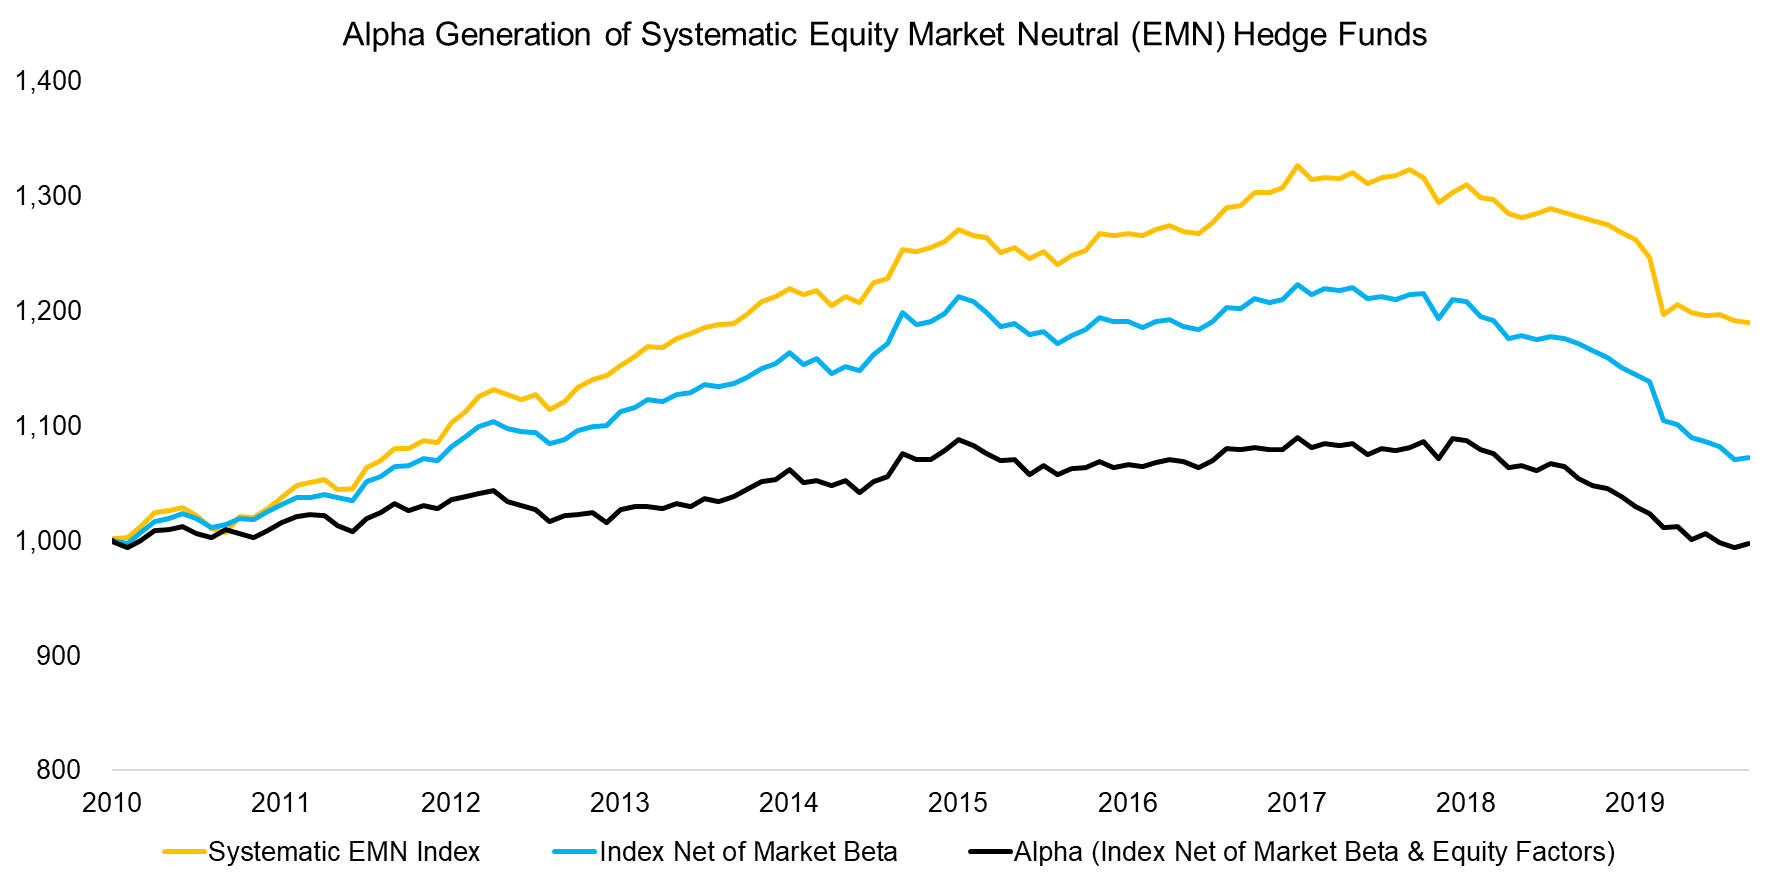 Alpha Generation of Systematic Equity Market Neutral (EMN) Hedge Funds